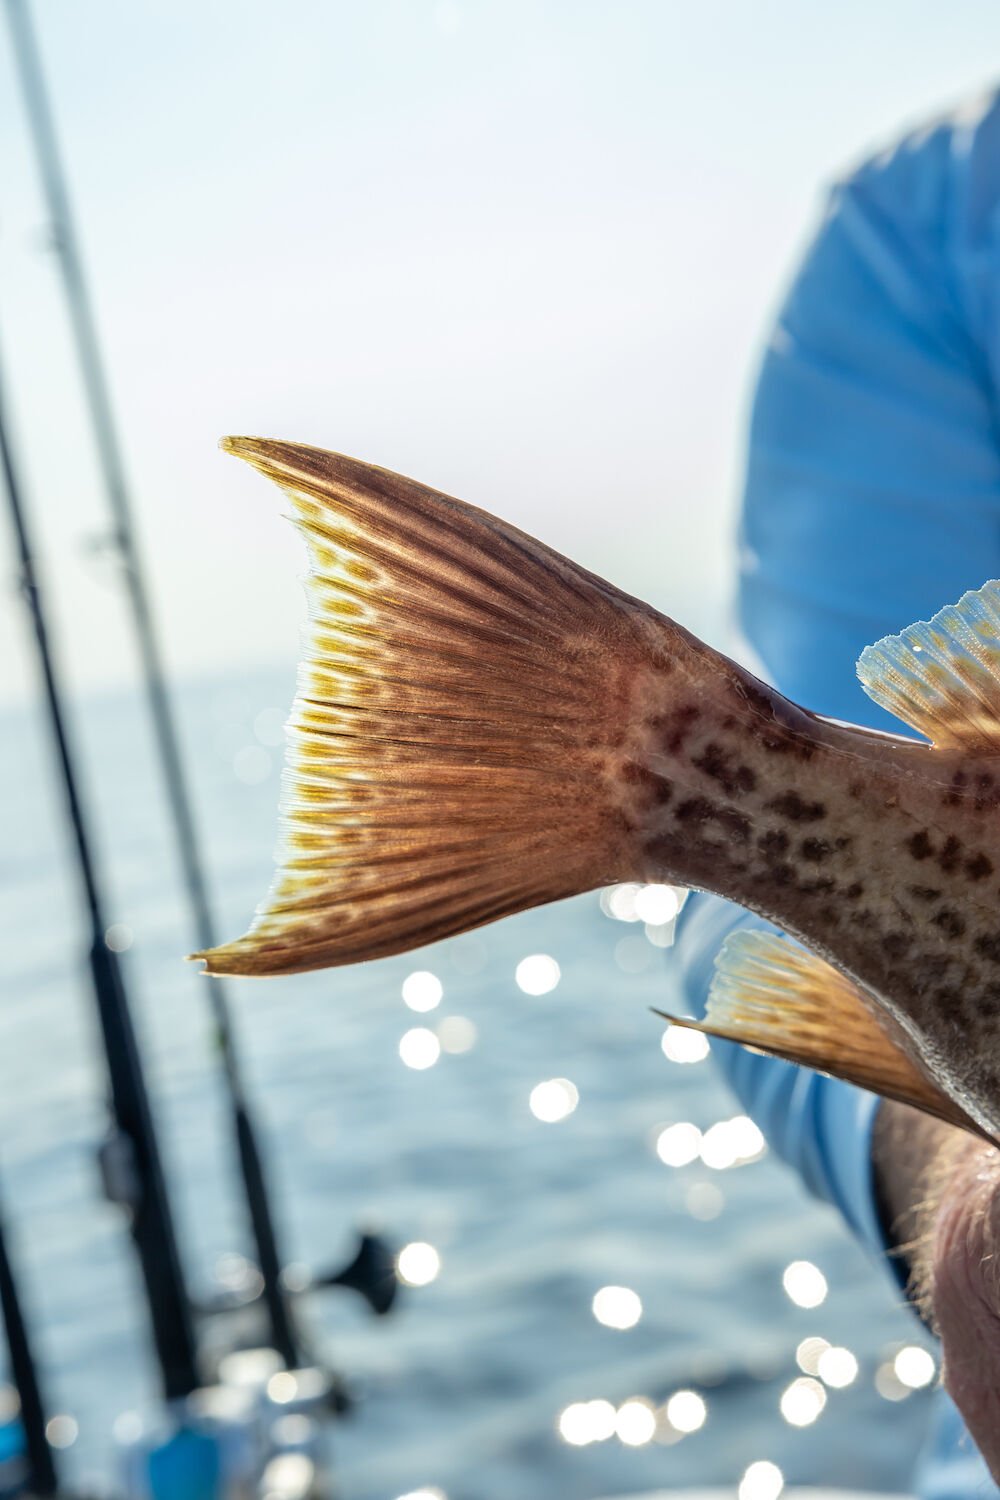 Expert Tactics for Targeting Scamp Grouper, OffShore